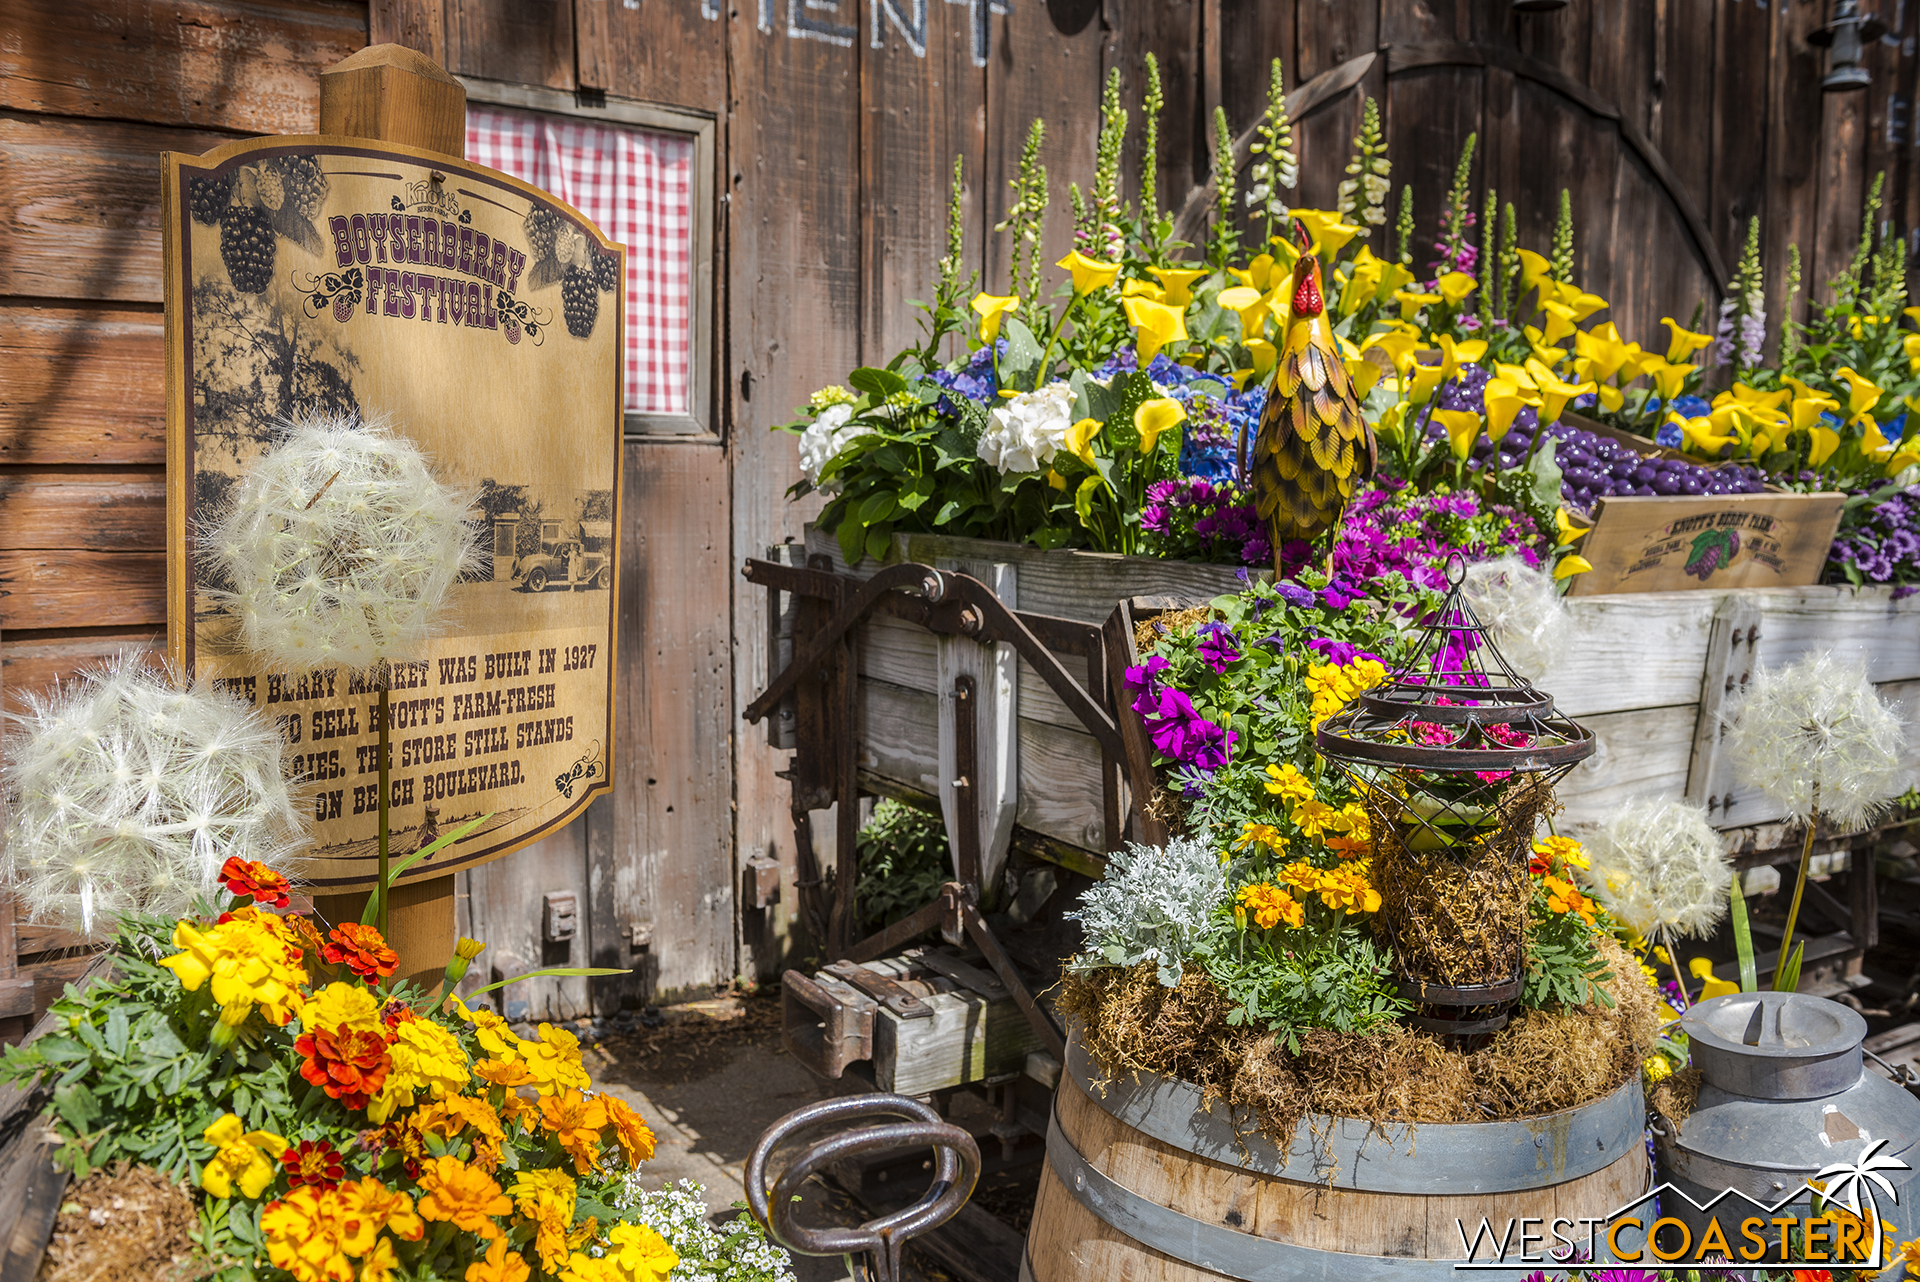  Spring is all over the air at Knott's Boysenberry Festival! 